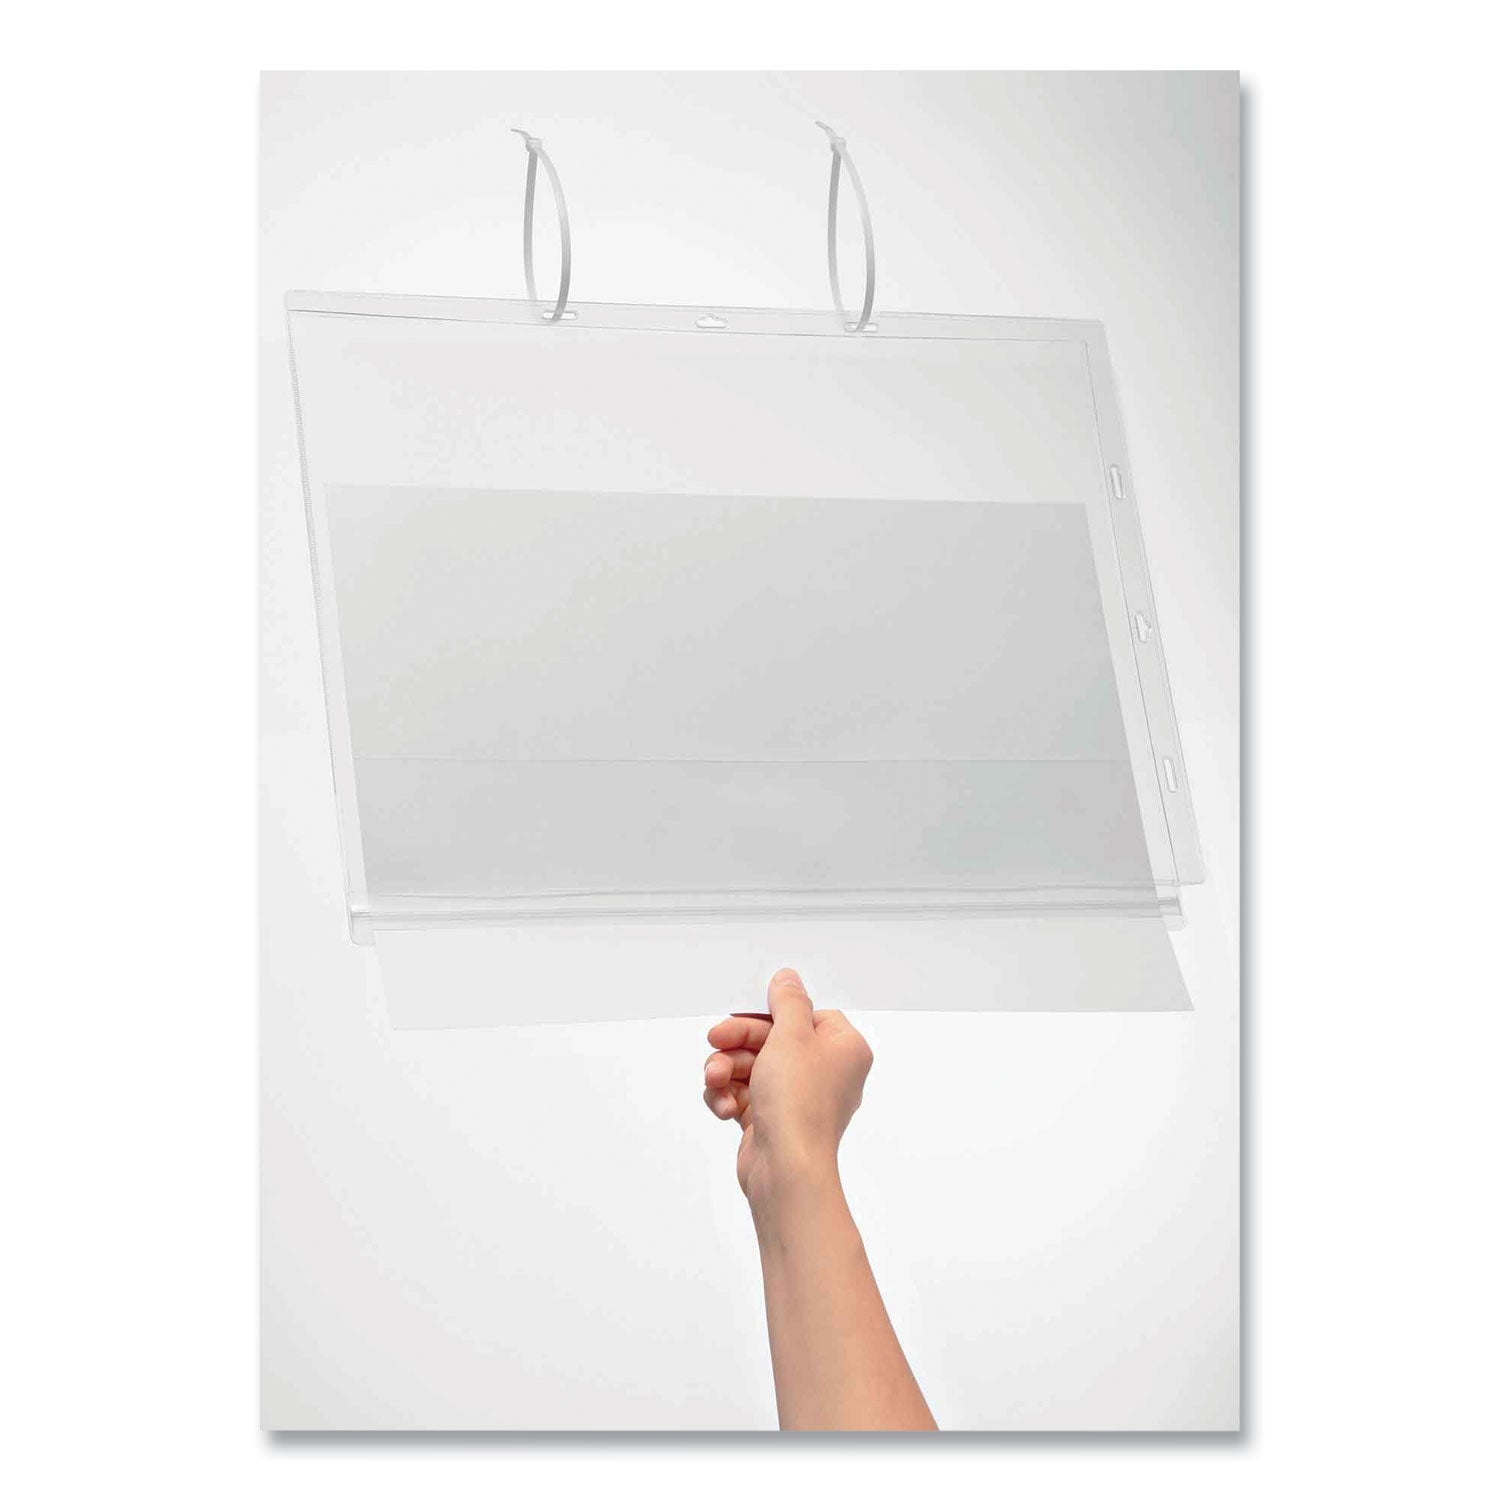 water-resistant-sign-holder-pockets-with-cable-ties-11-x-17-clear-frame-5-pack_dbl502819 - 4